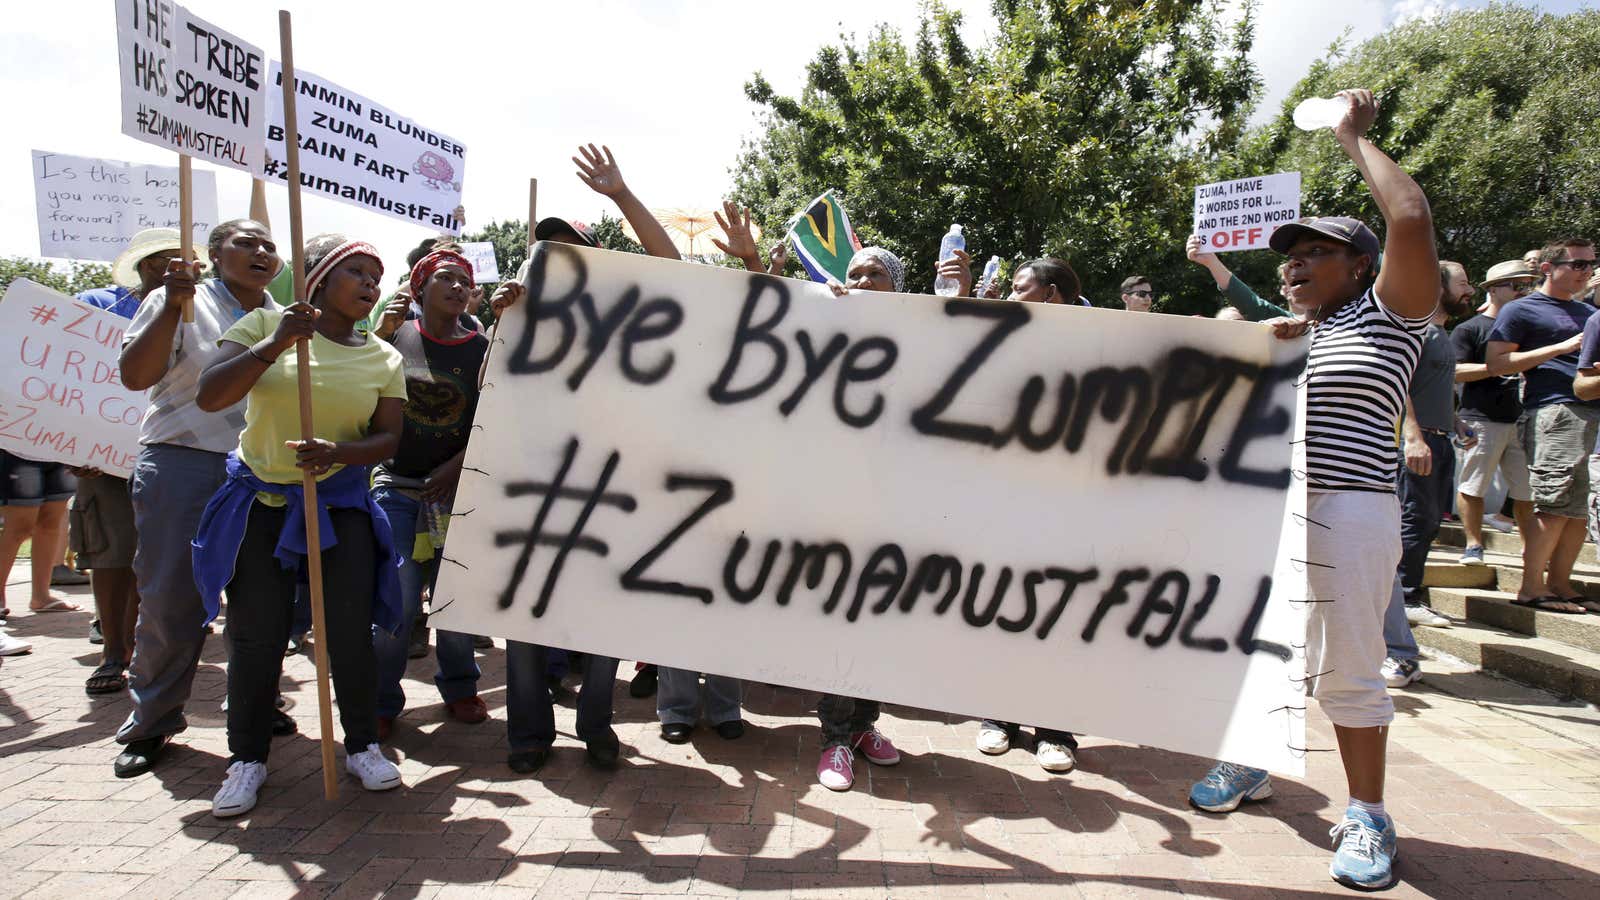 Protestors in Cape Town demanding that Jacob Zuma step down from the presidency.